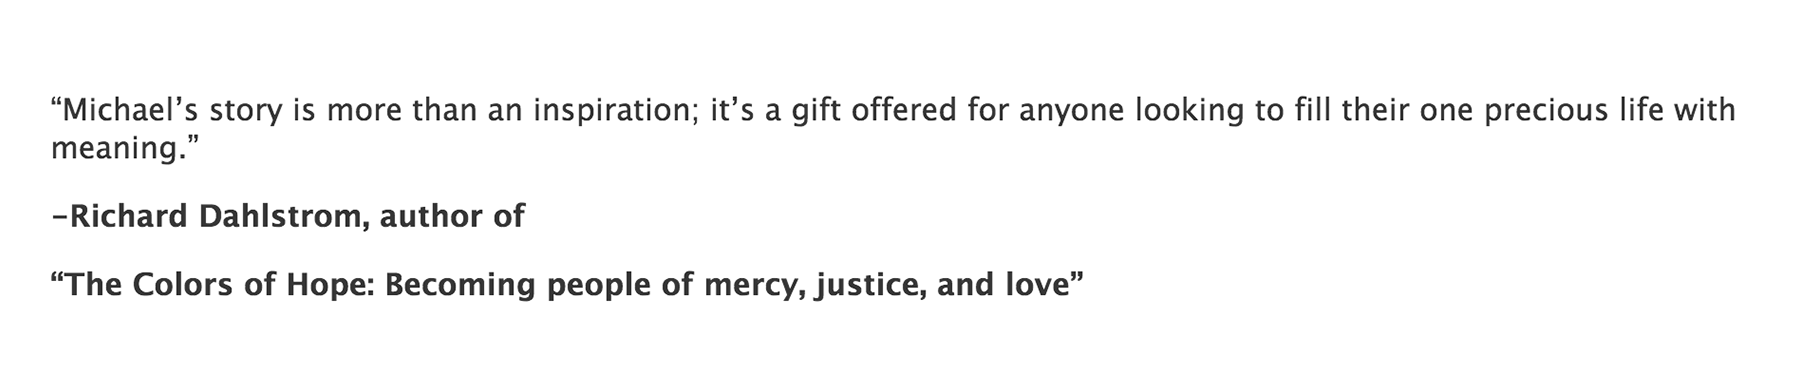 Giftocracy by Michael Tetteh_Testamonials 3.png